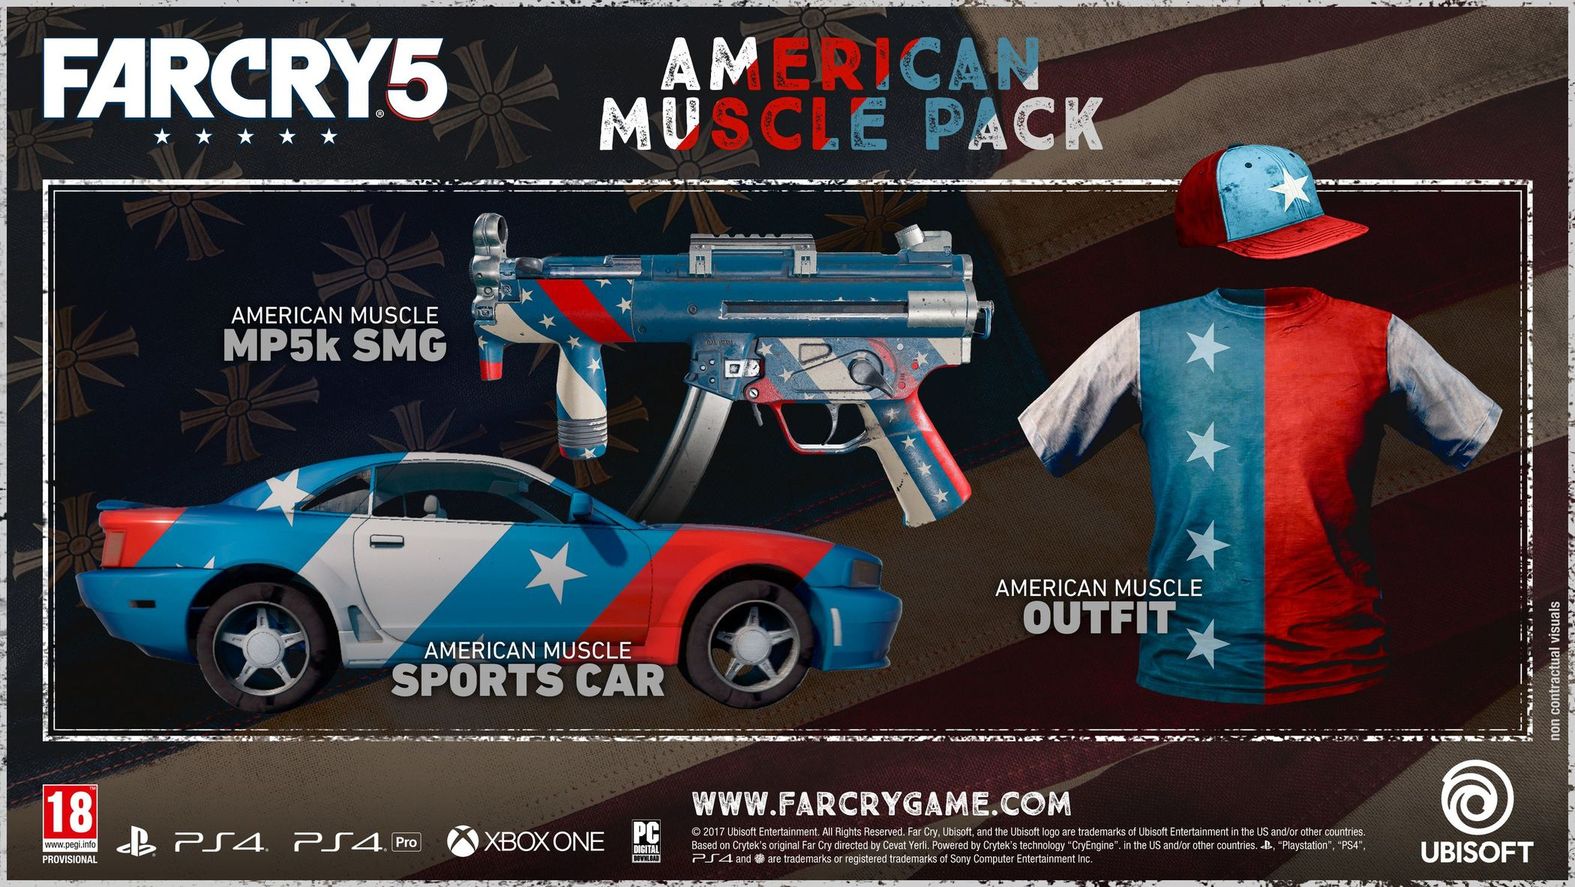 Far Cry 5 - American Muscle Pack DLC Key (PC / PS4 / XBOX One)